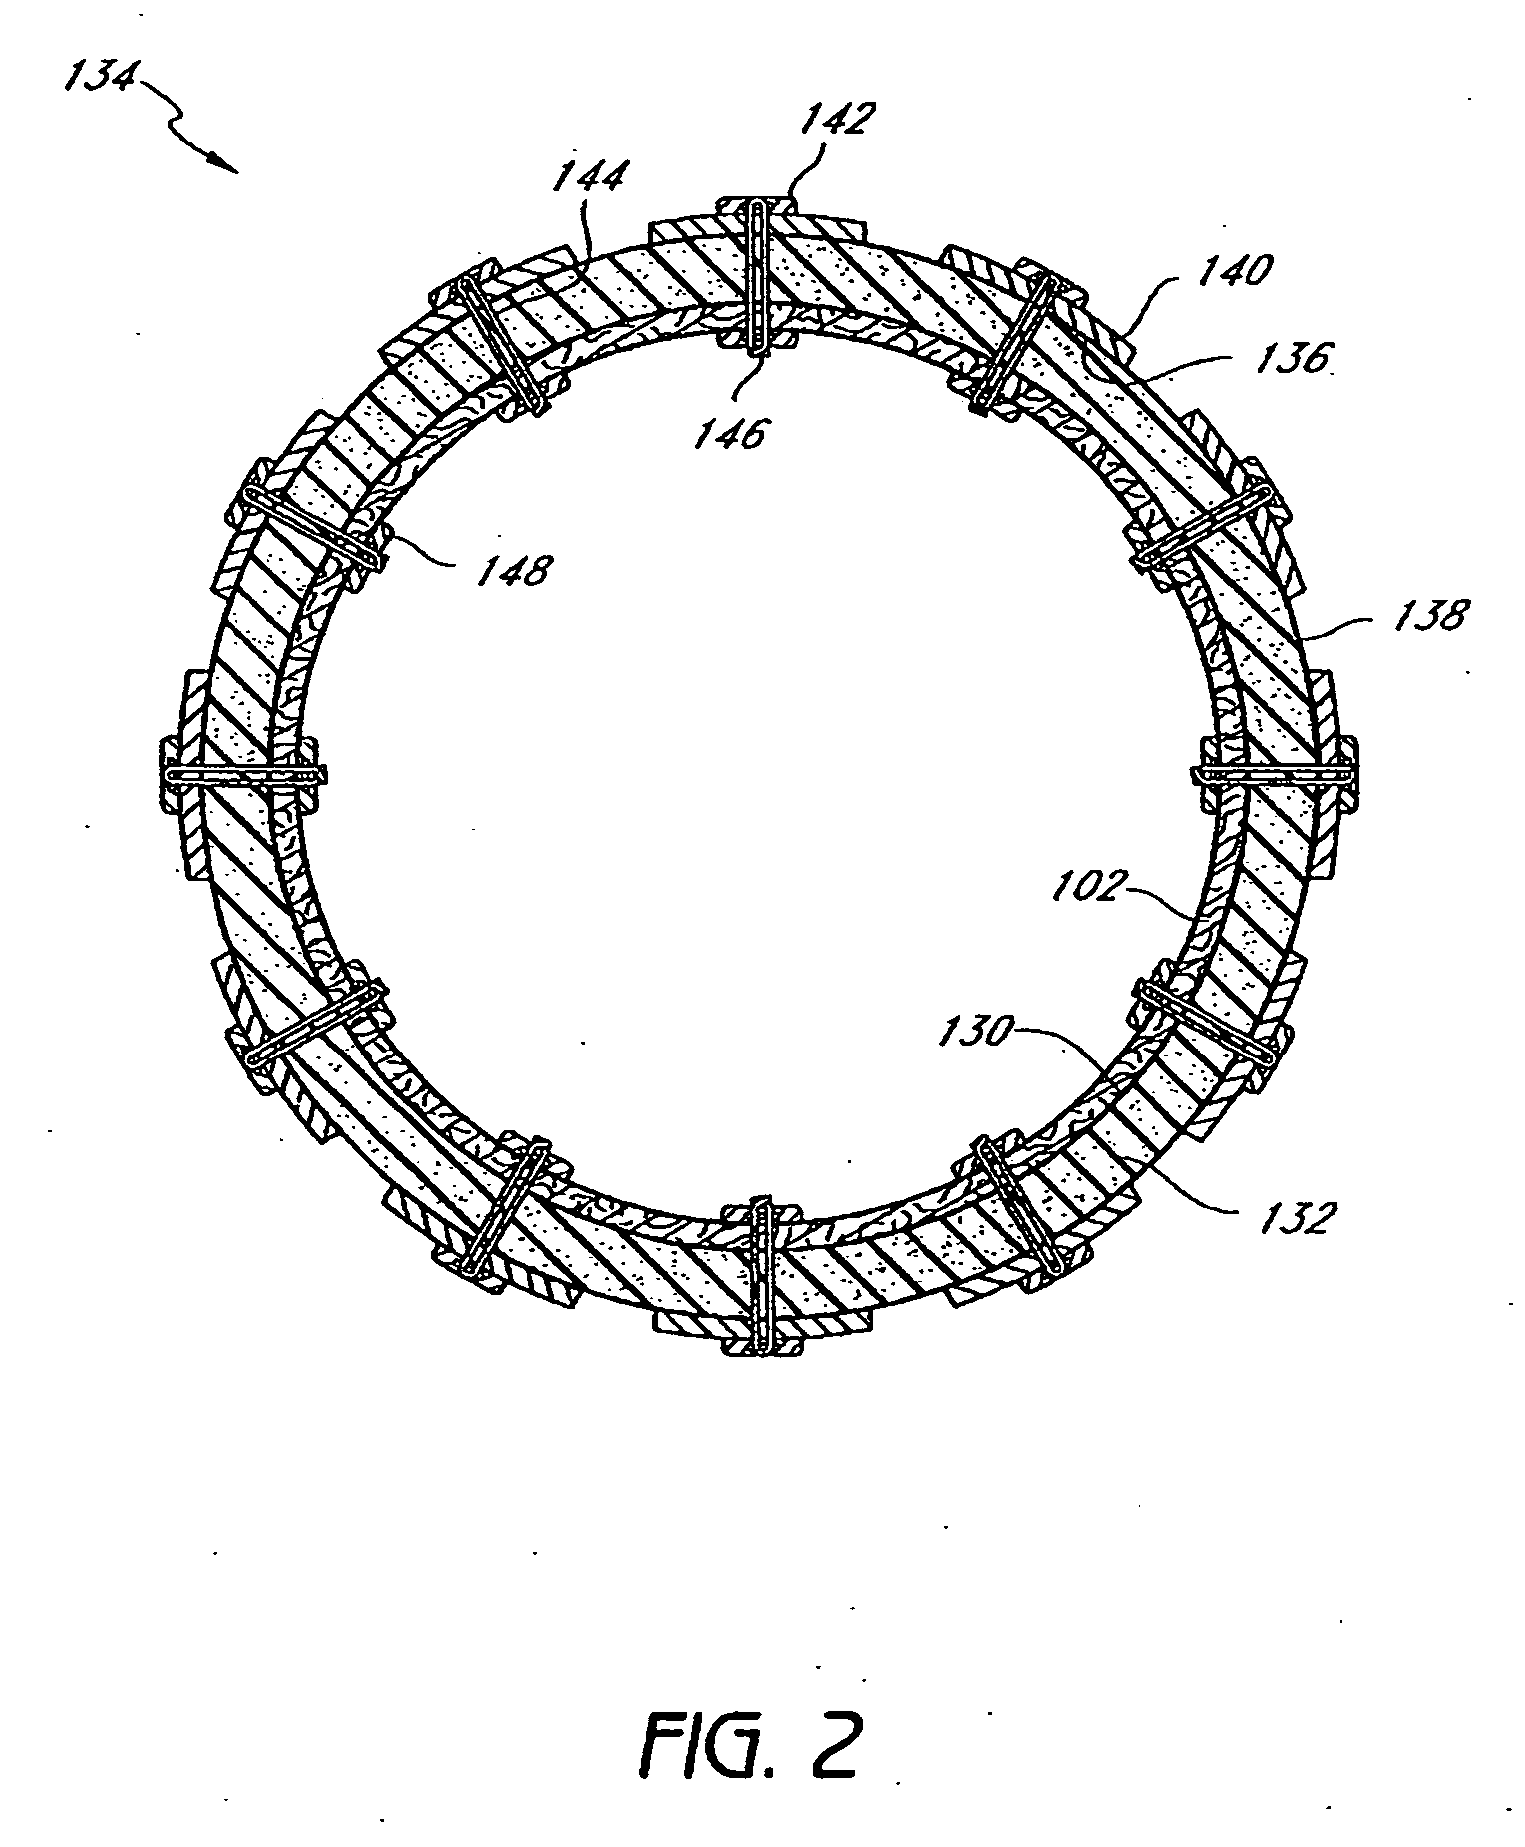 Cuff and sleeve system for gastrointestinal bypass